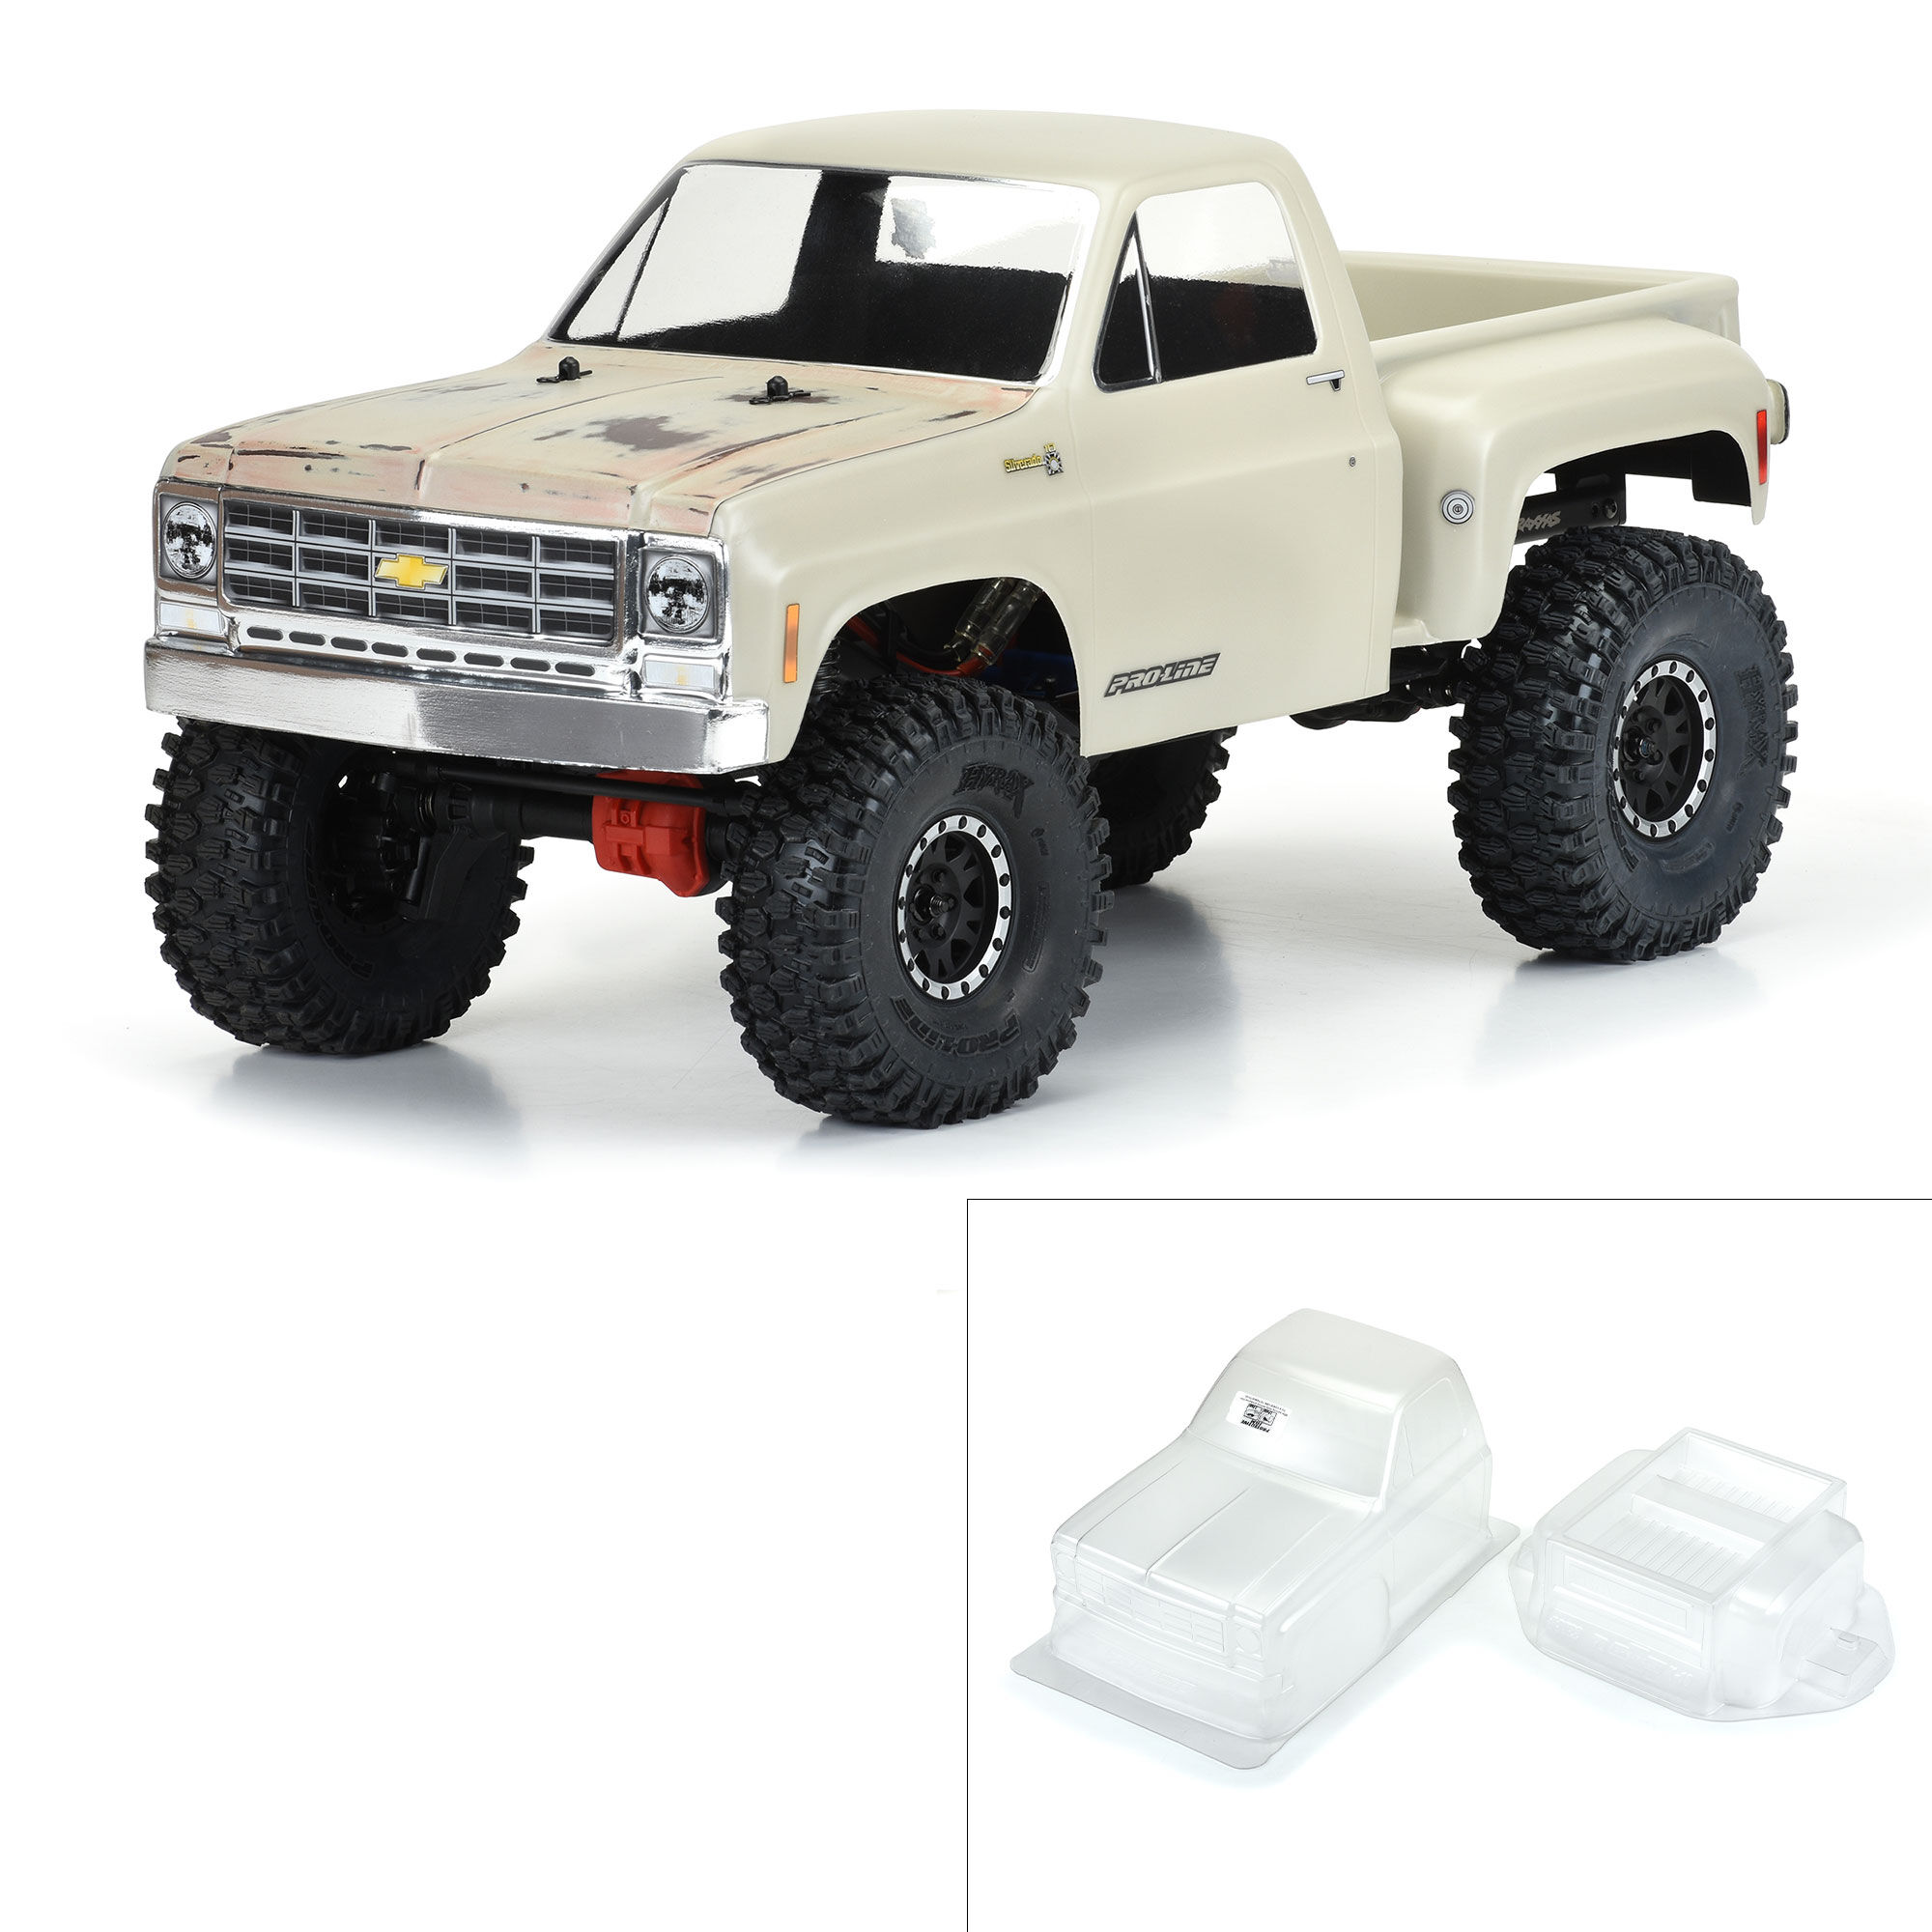 Pro-Line Racing 1/10 1978 Chevy K-10 Clear Body 12.3